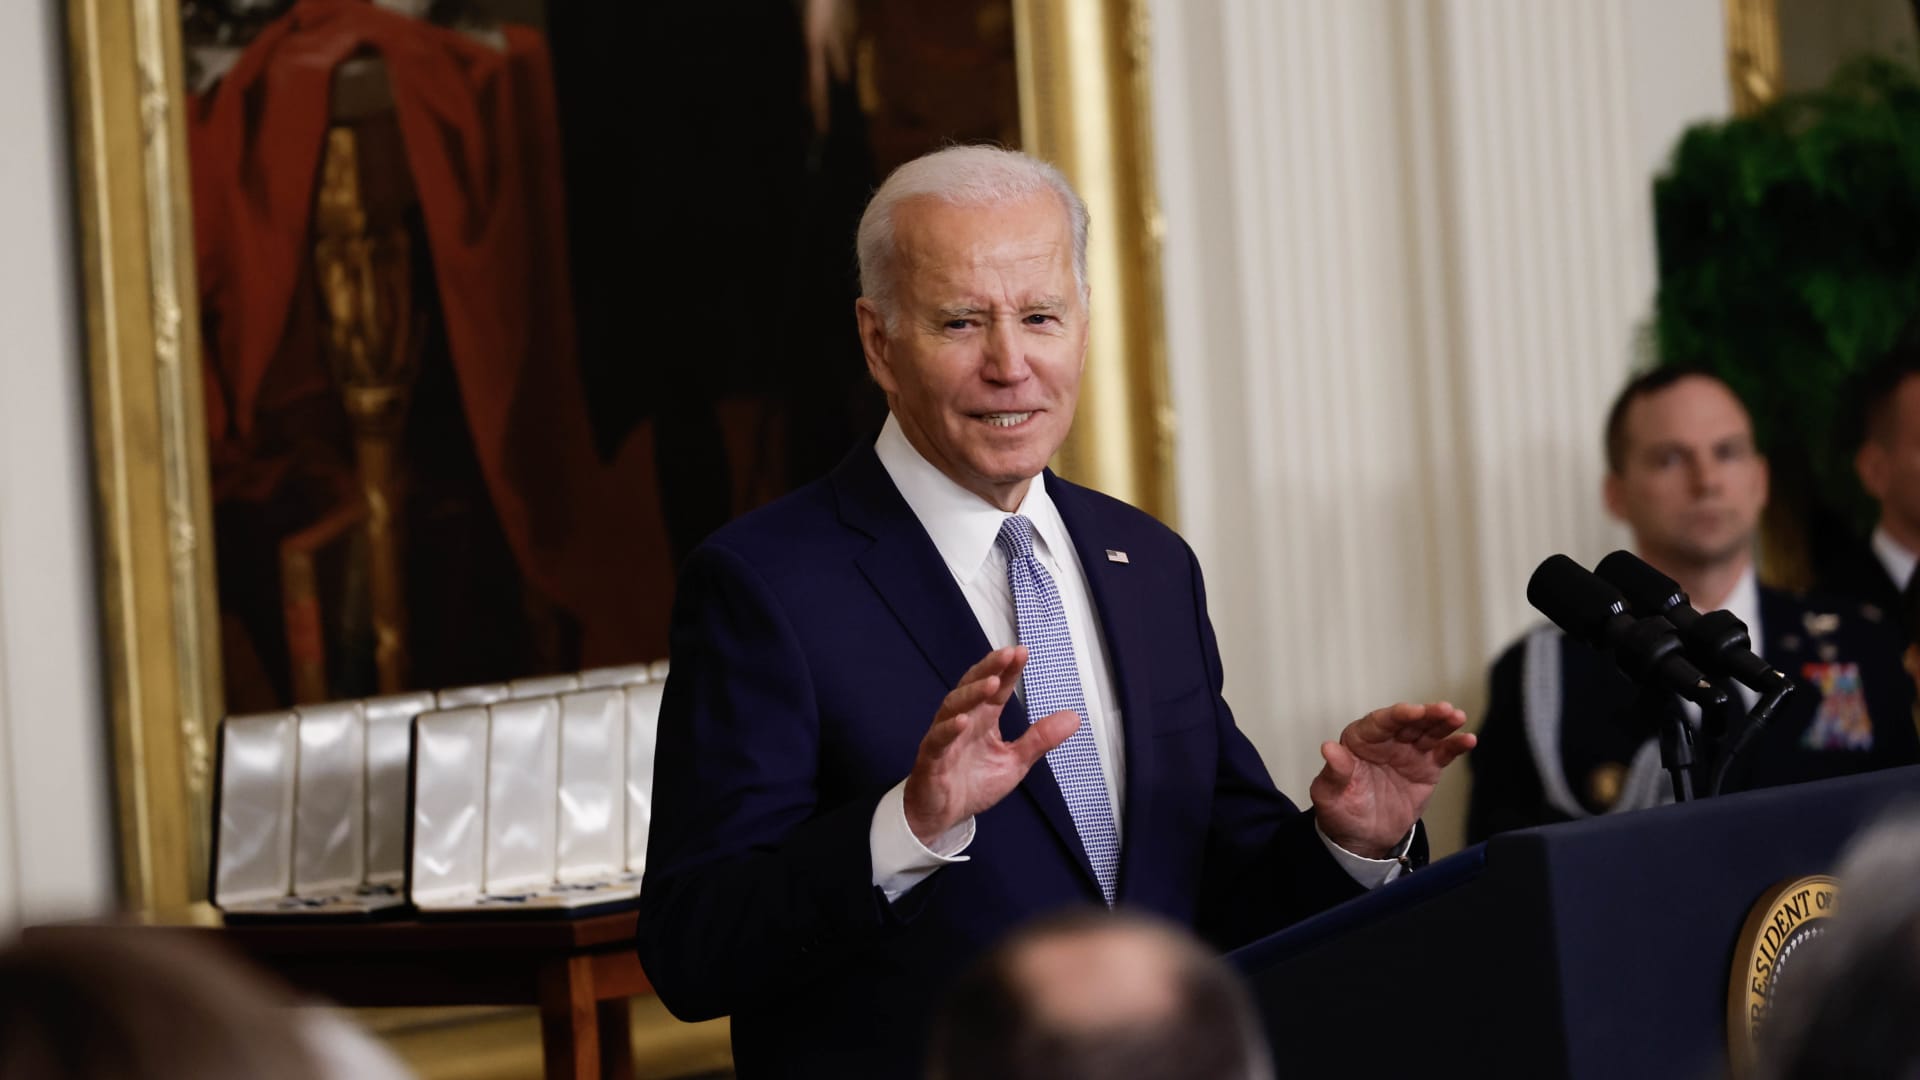 US President Joe Biden speaks during a ceremony at the White House marking the two-year anniversary of the January 6 insurrection at the US Capitol in Washington, DC, on Friday, Jan. 6, 2023.